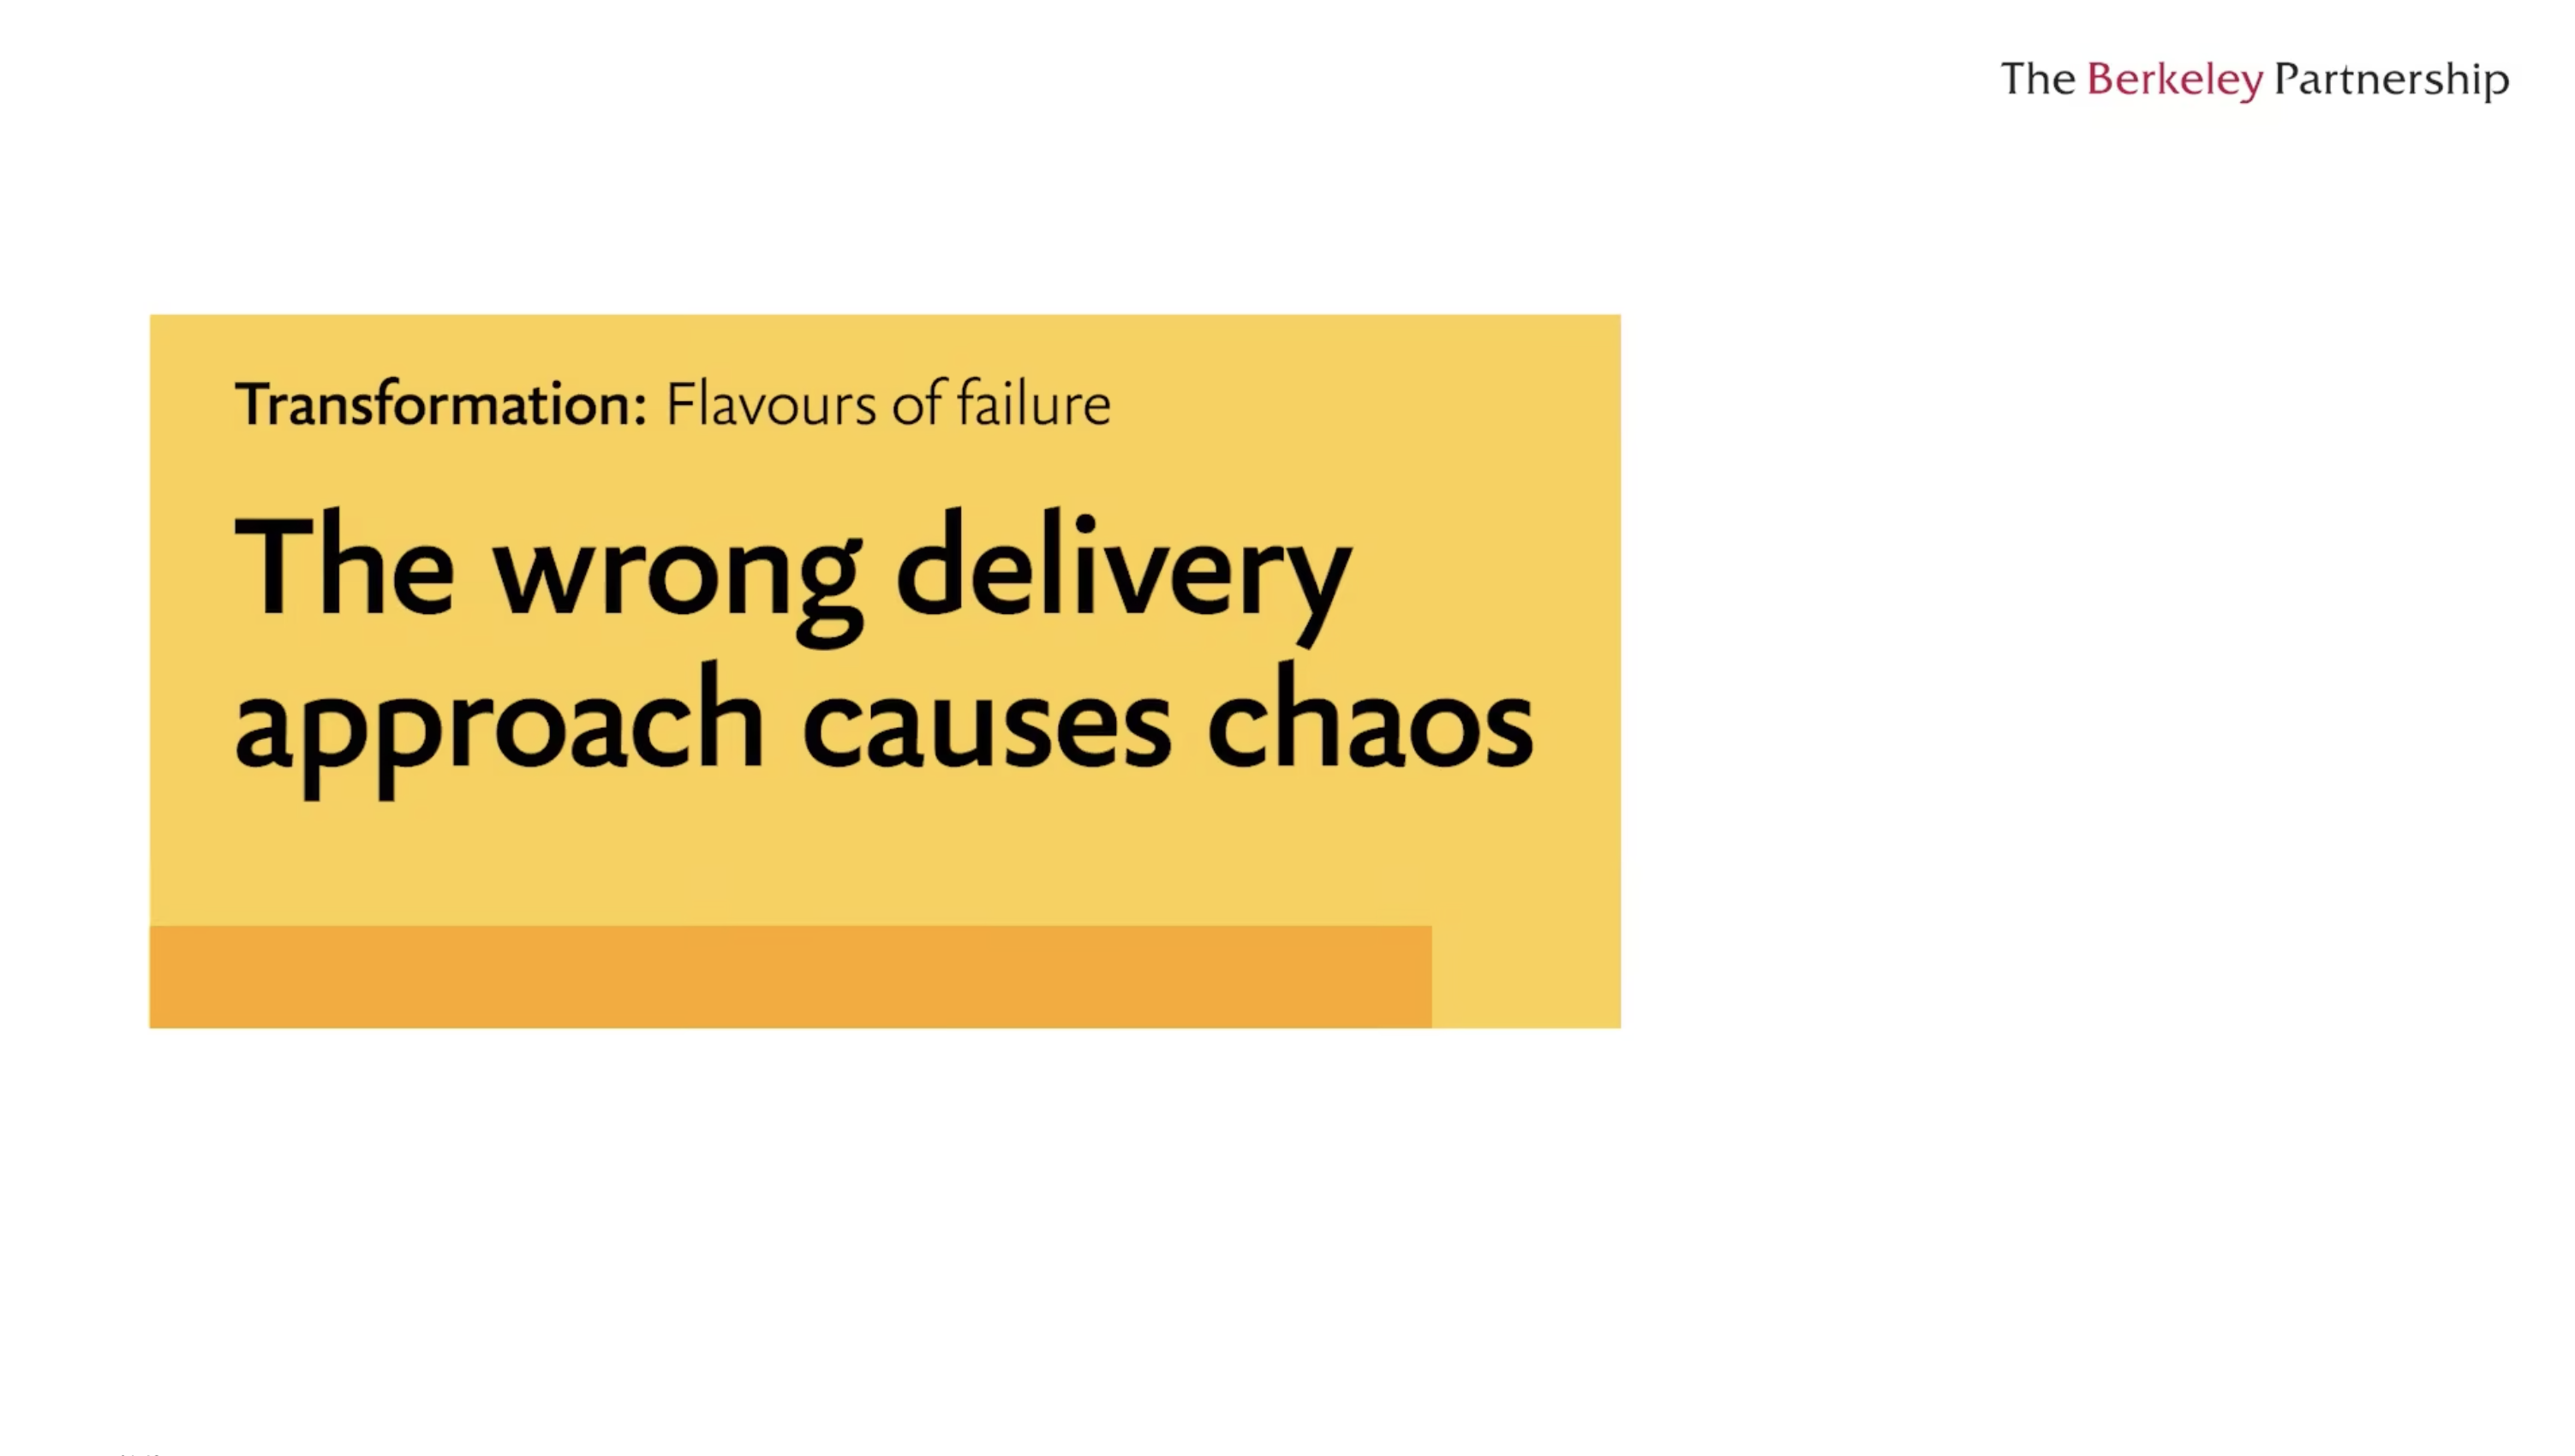 Flavours of failure: The wrong delivery approach causes chaos